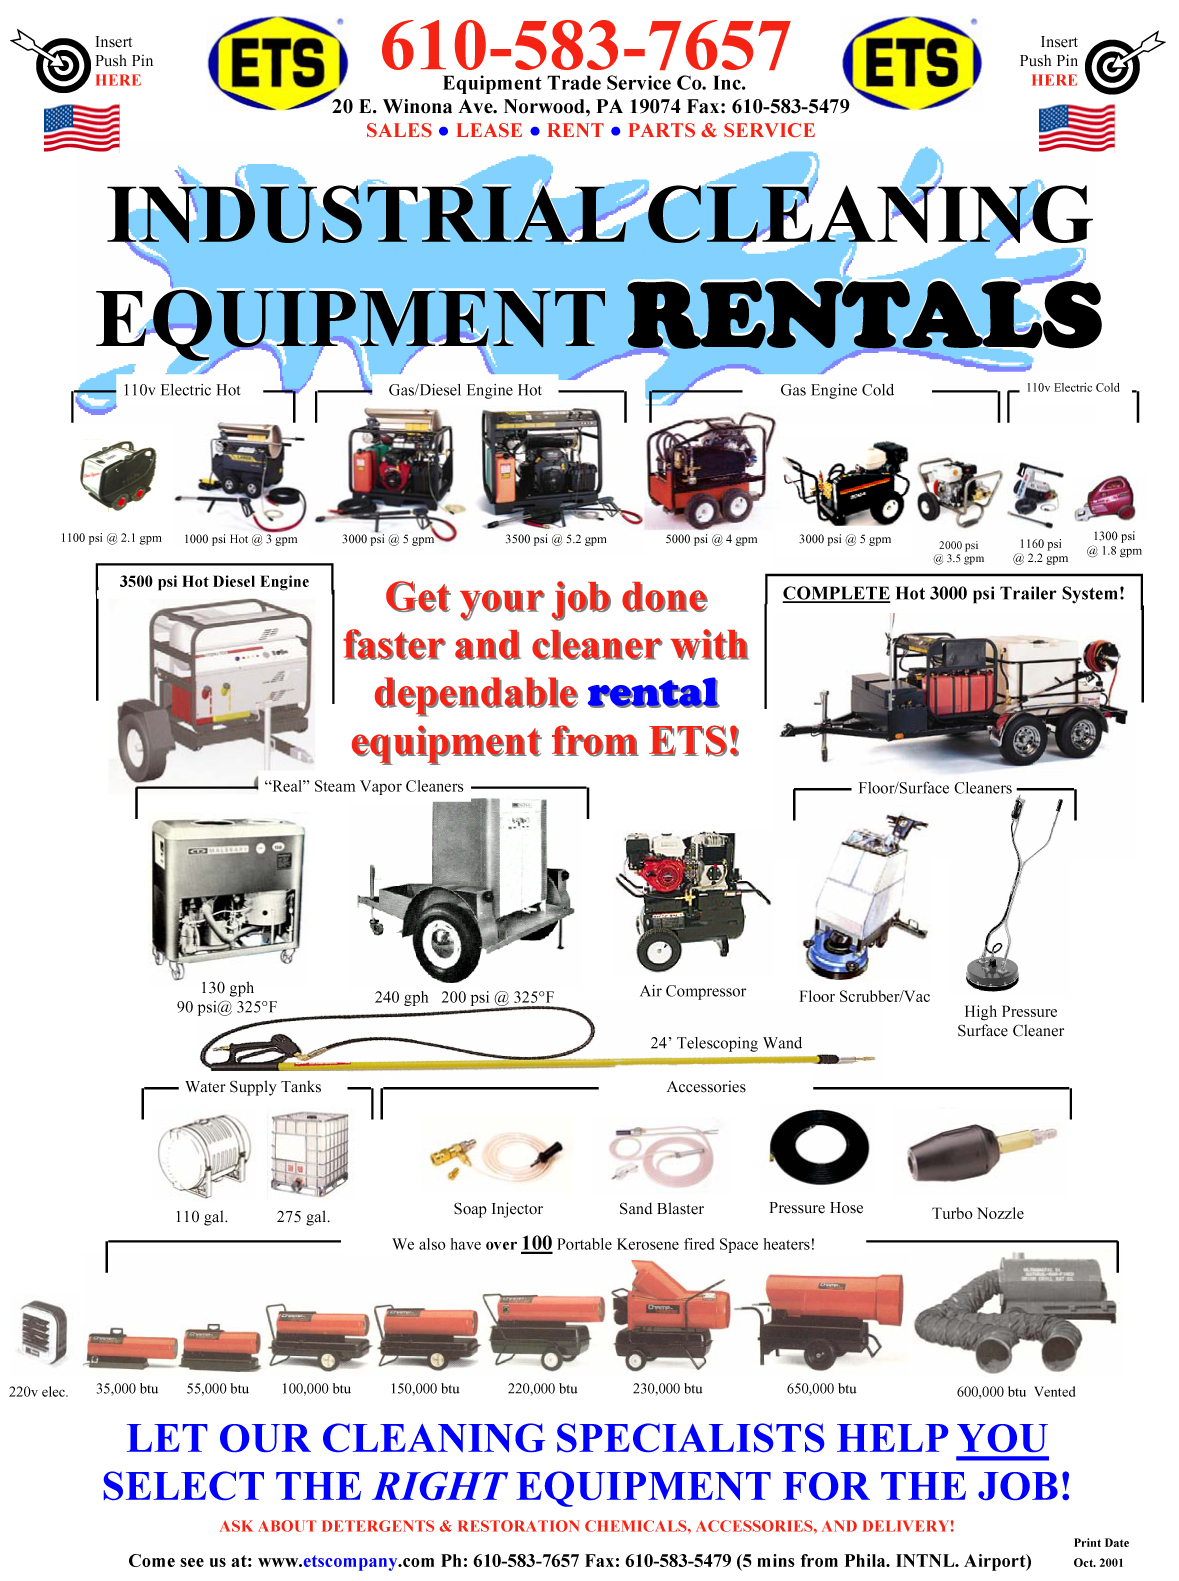 Click here to view our Industrial Equipment Rental Brochure!